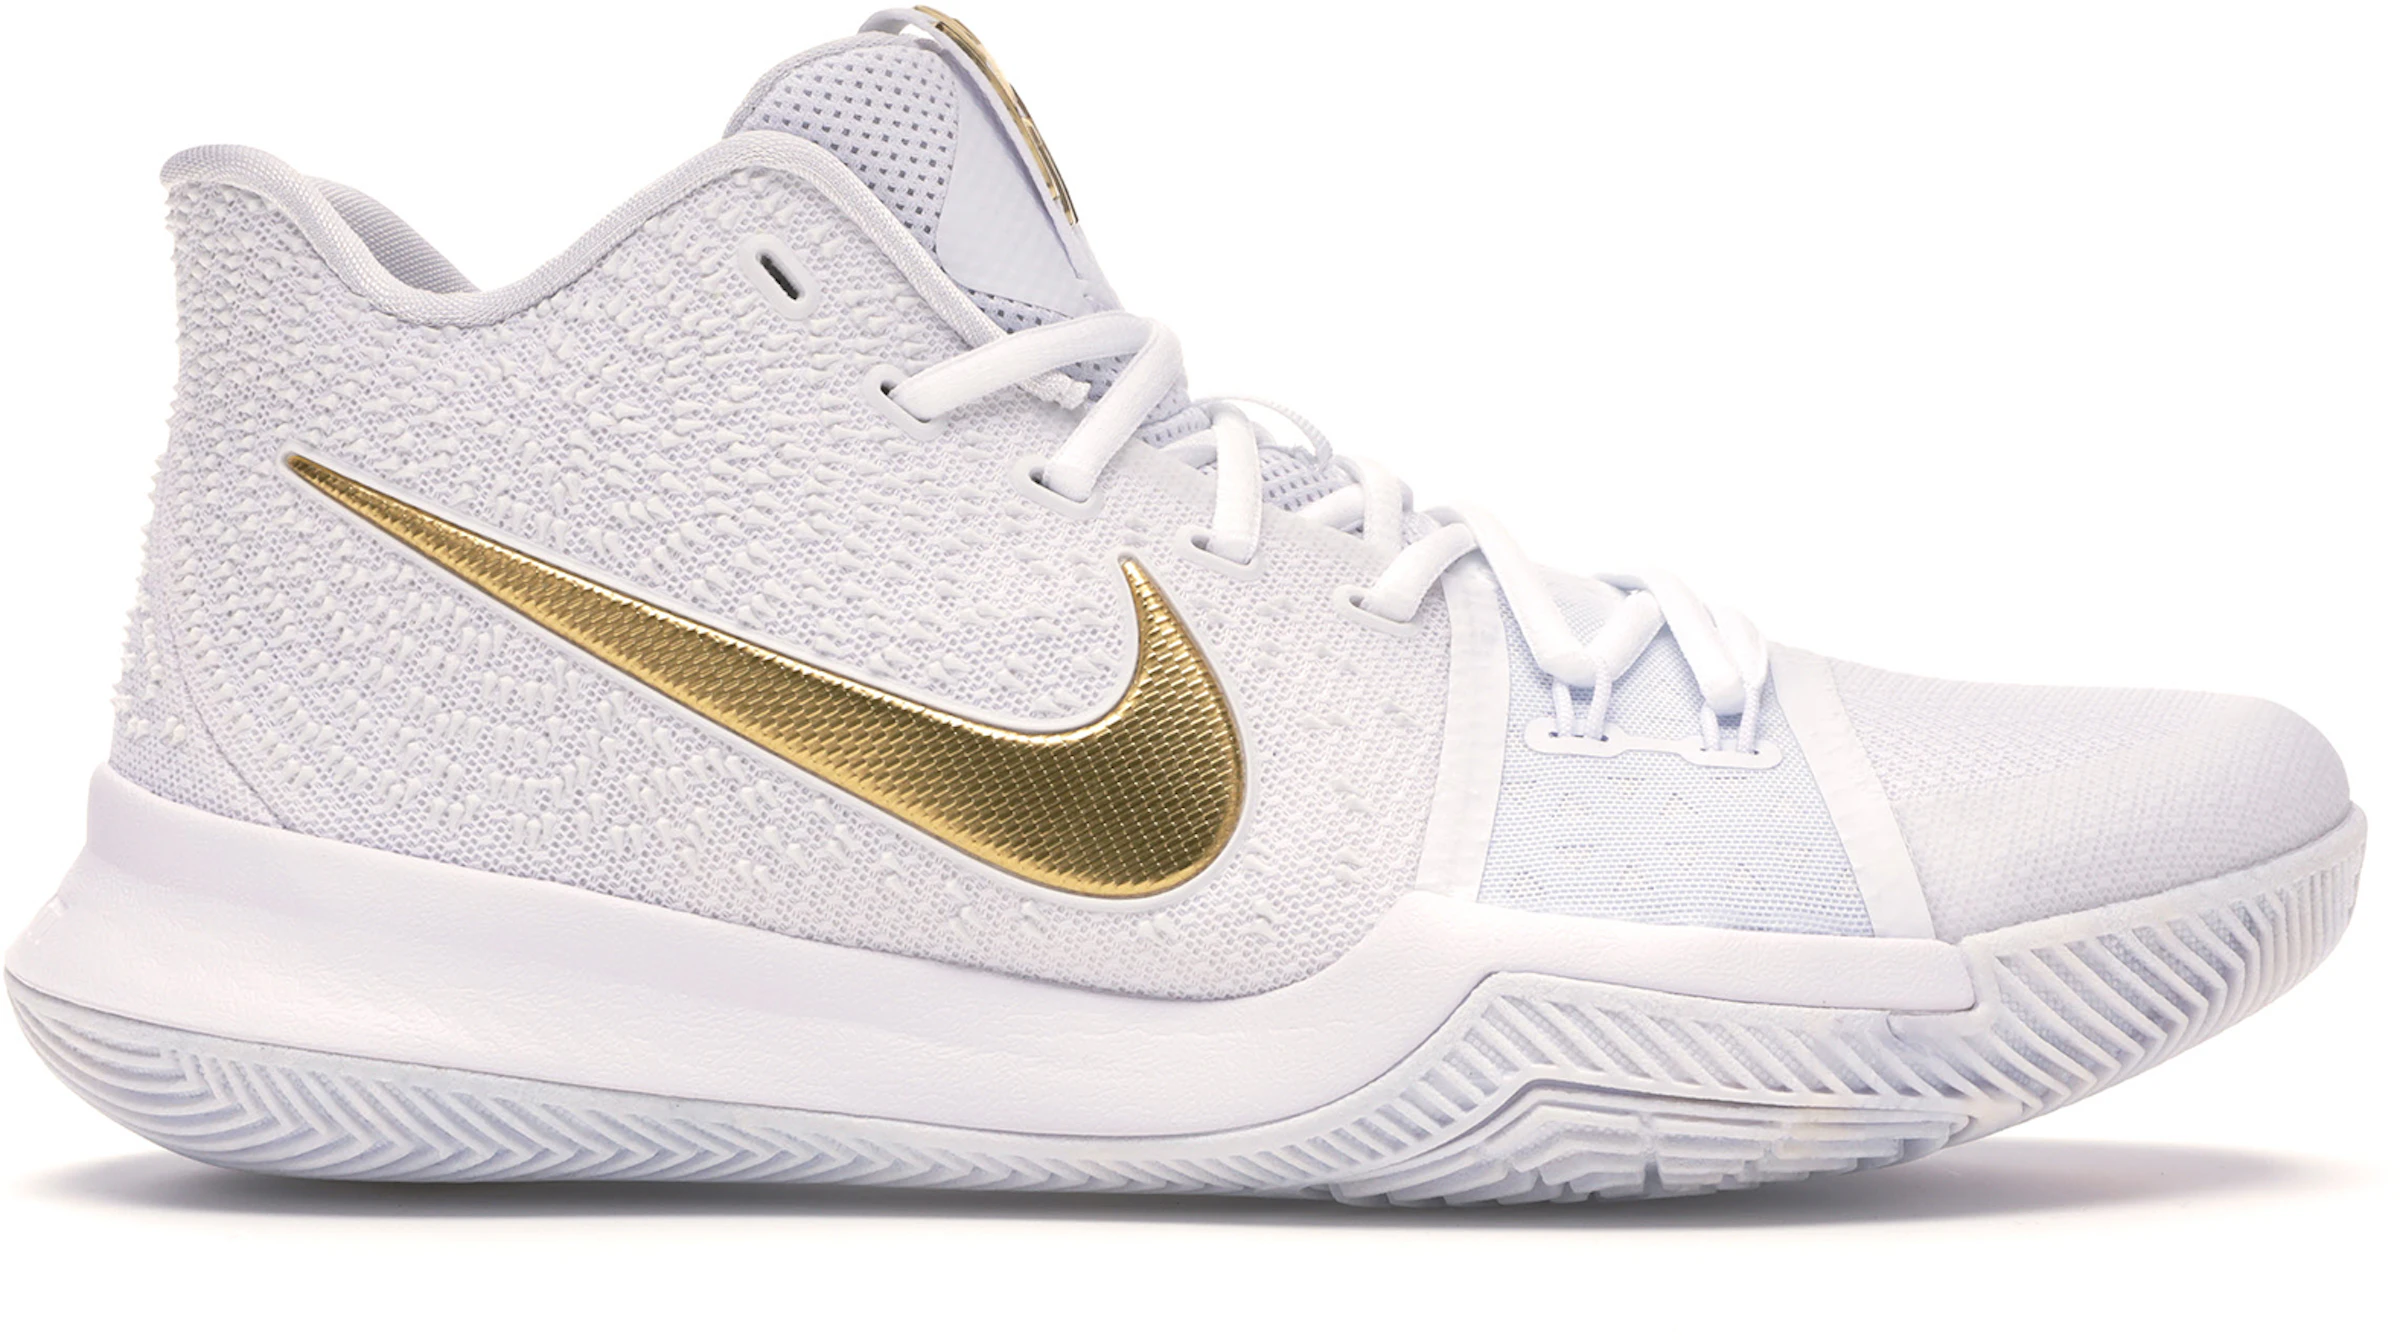 Nike Kyrie 3 Finals Gold 852395-902 - ES